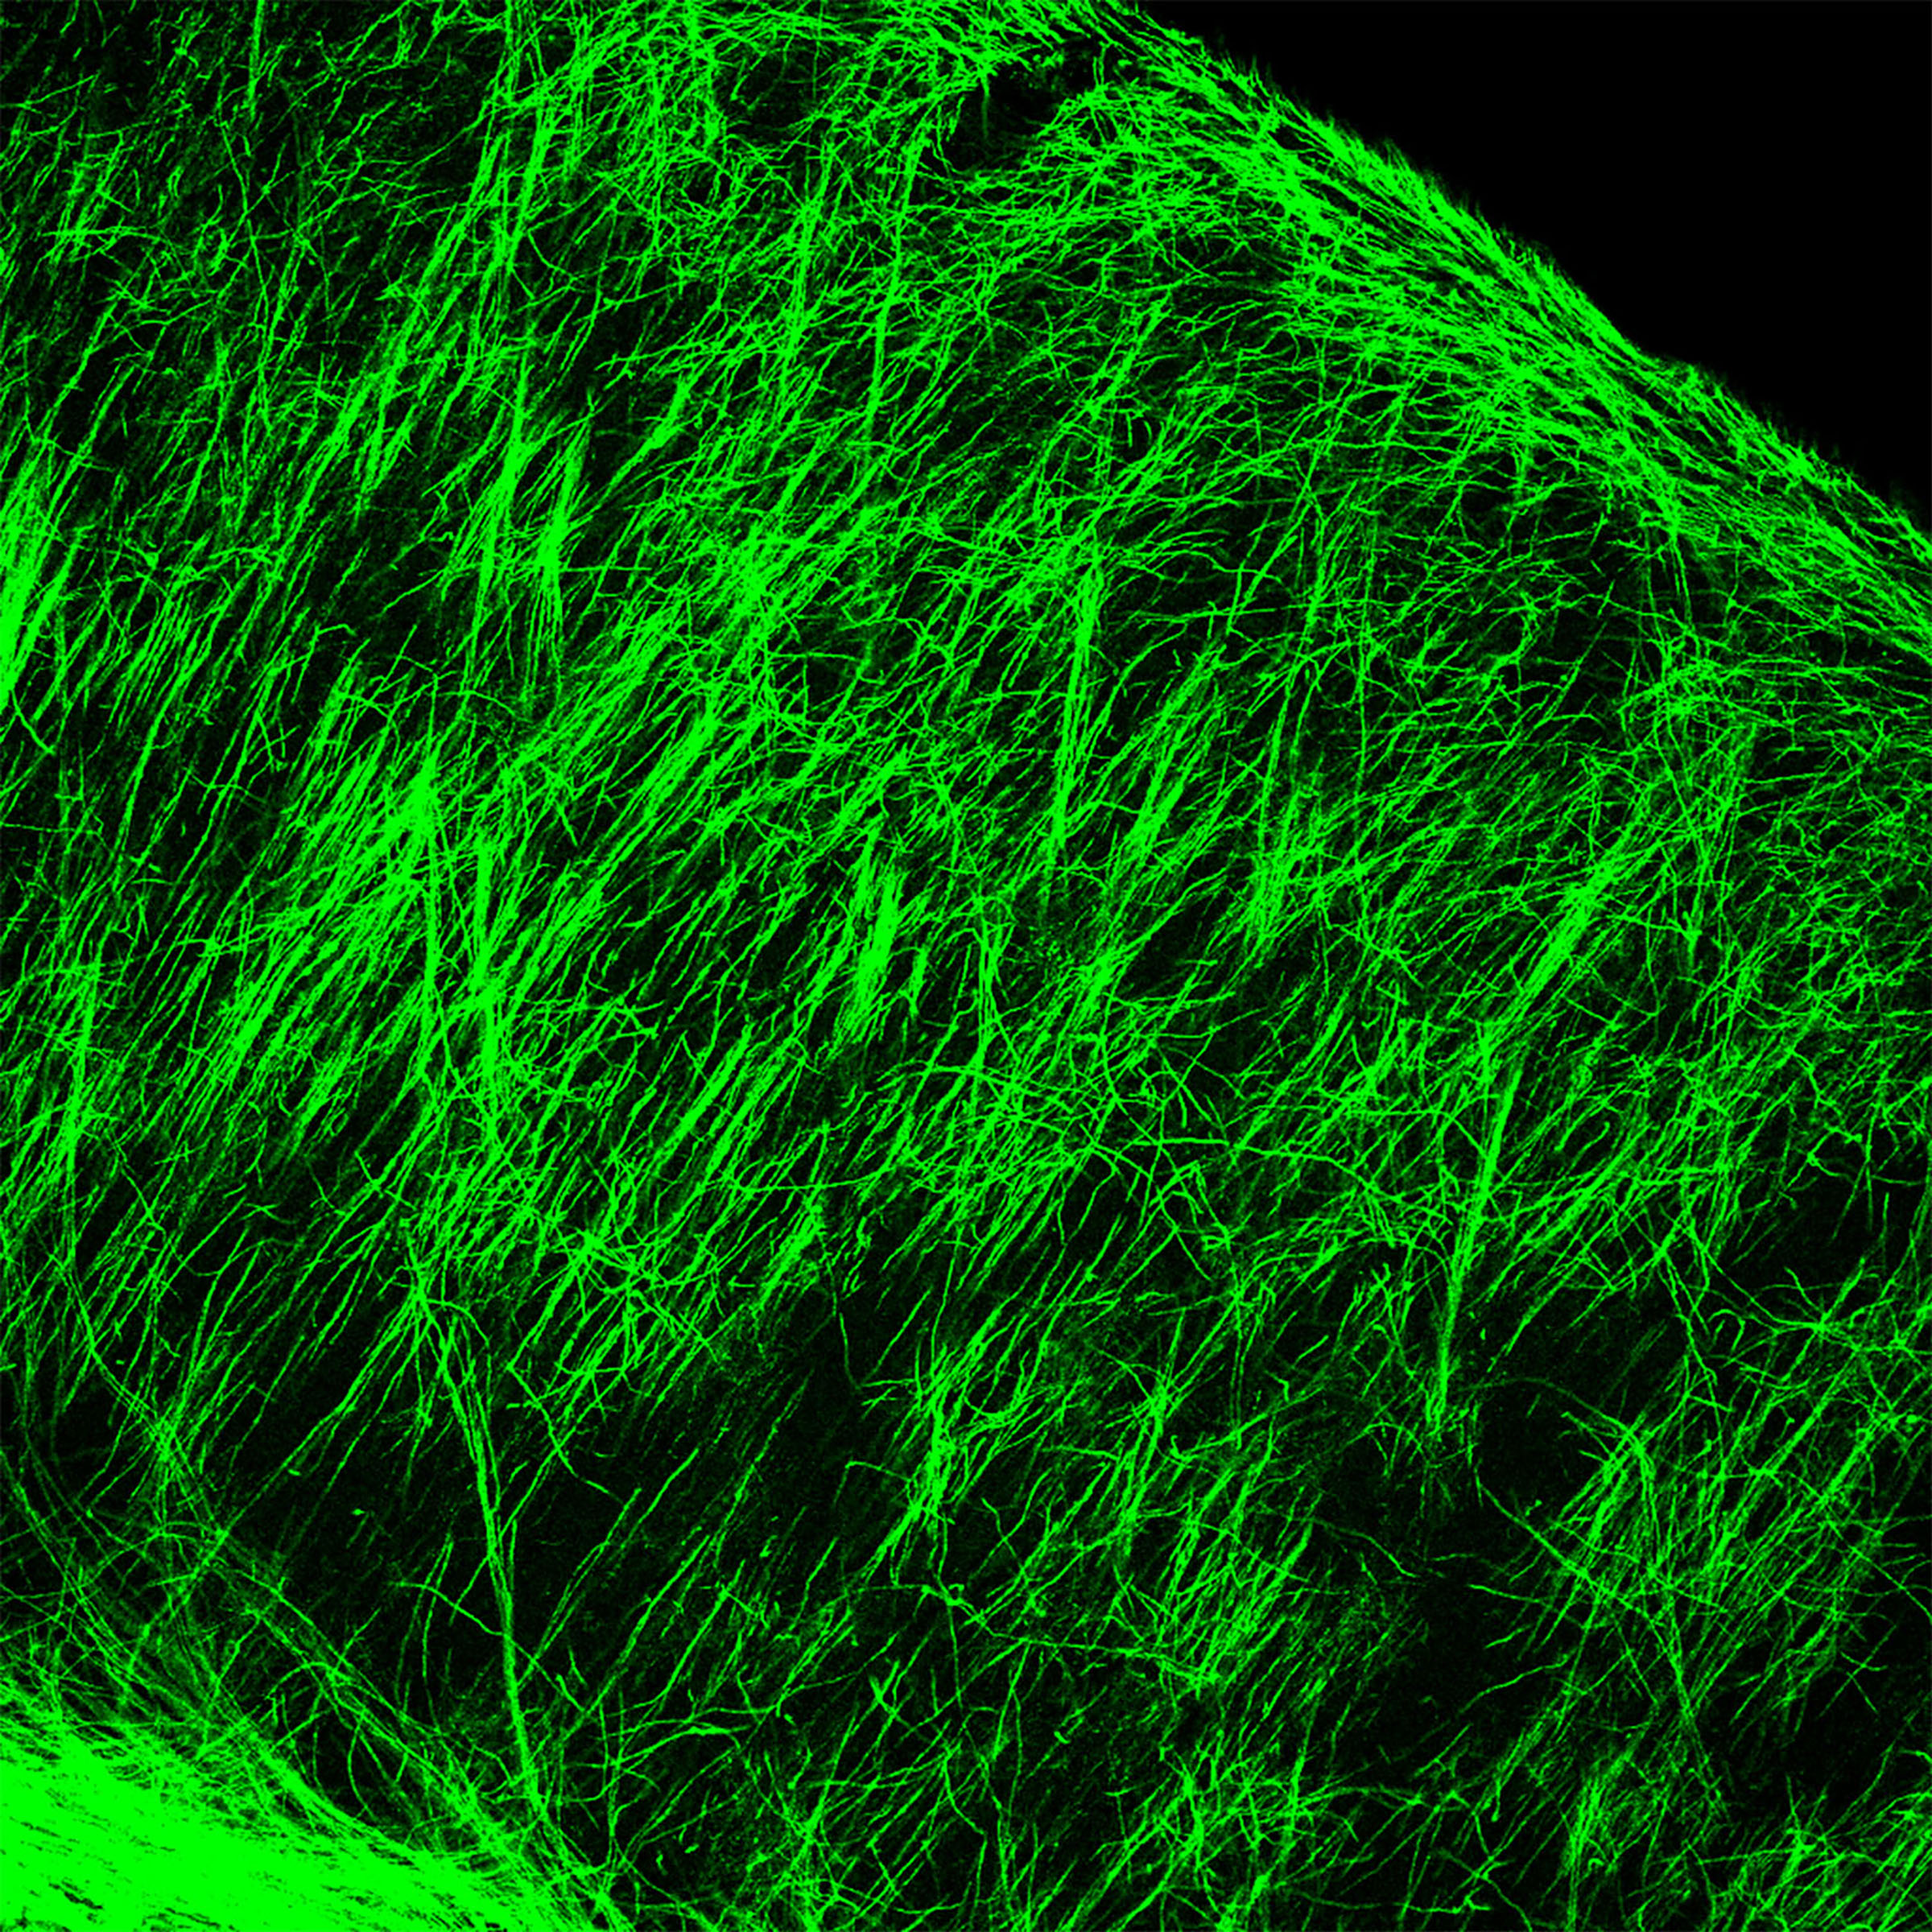 Outcome of remyelination treatment in a mouse model shown as a field of diagonal bright green strands.